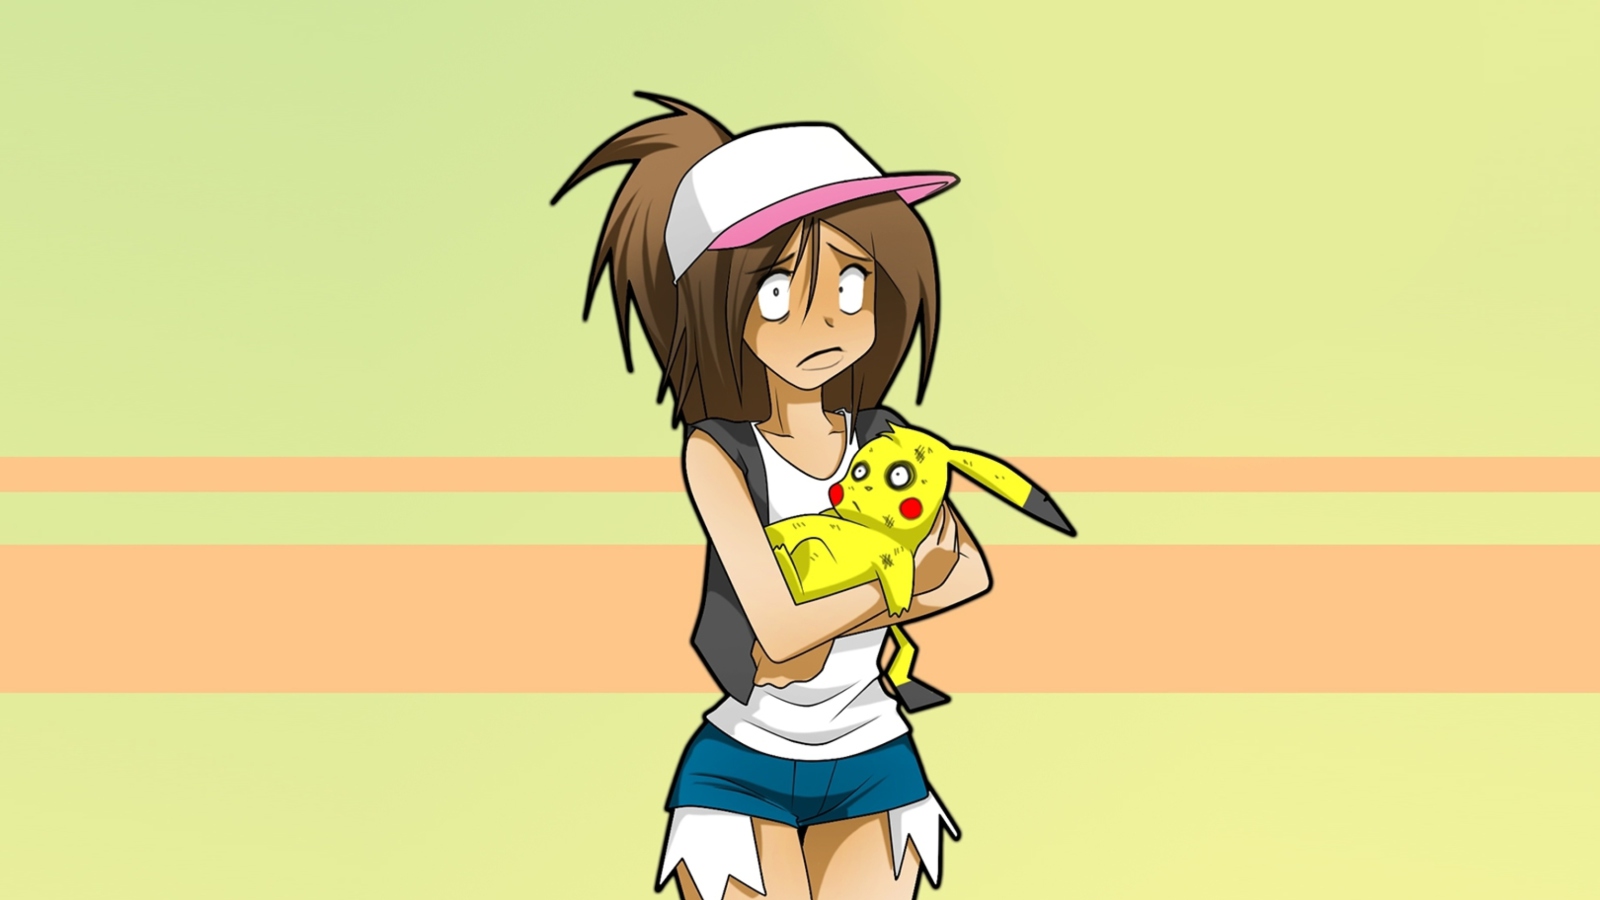 Hipster Girl And Her Pikachu wallpaper 1600x900